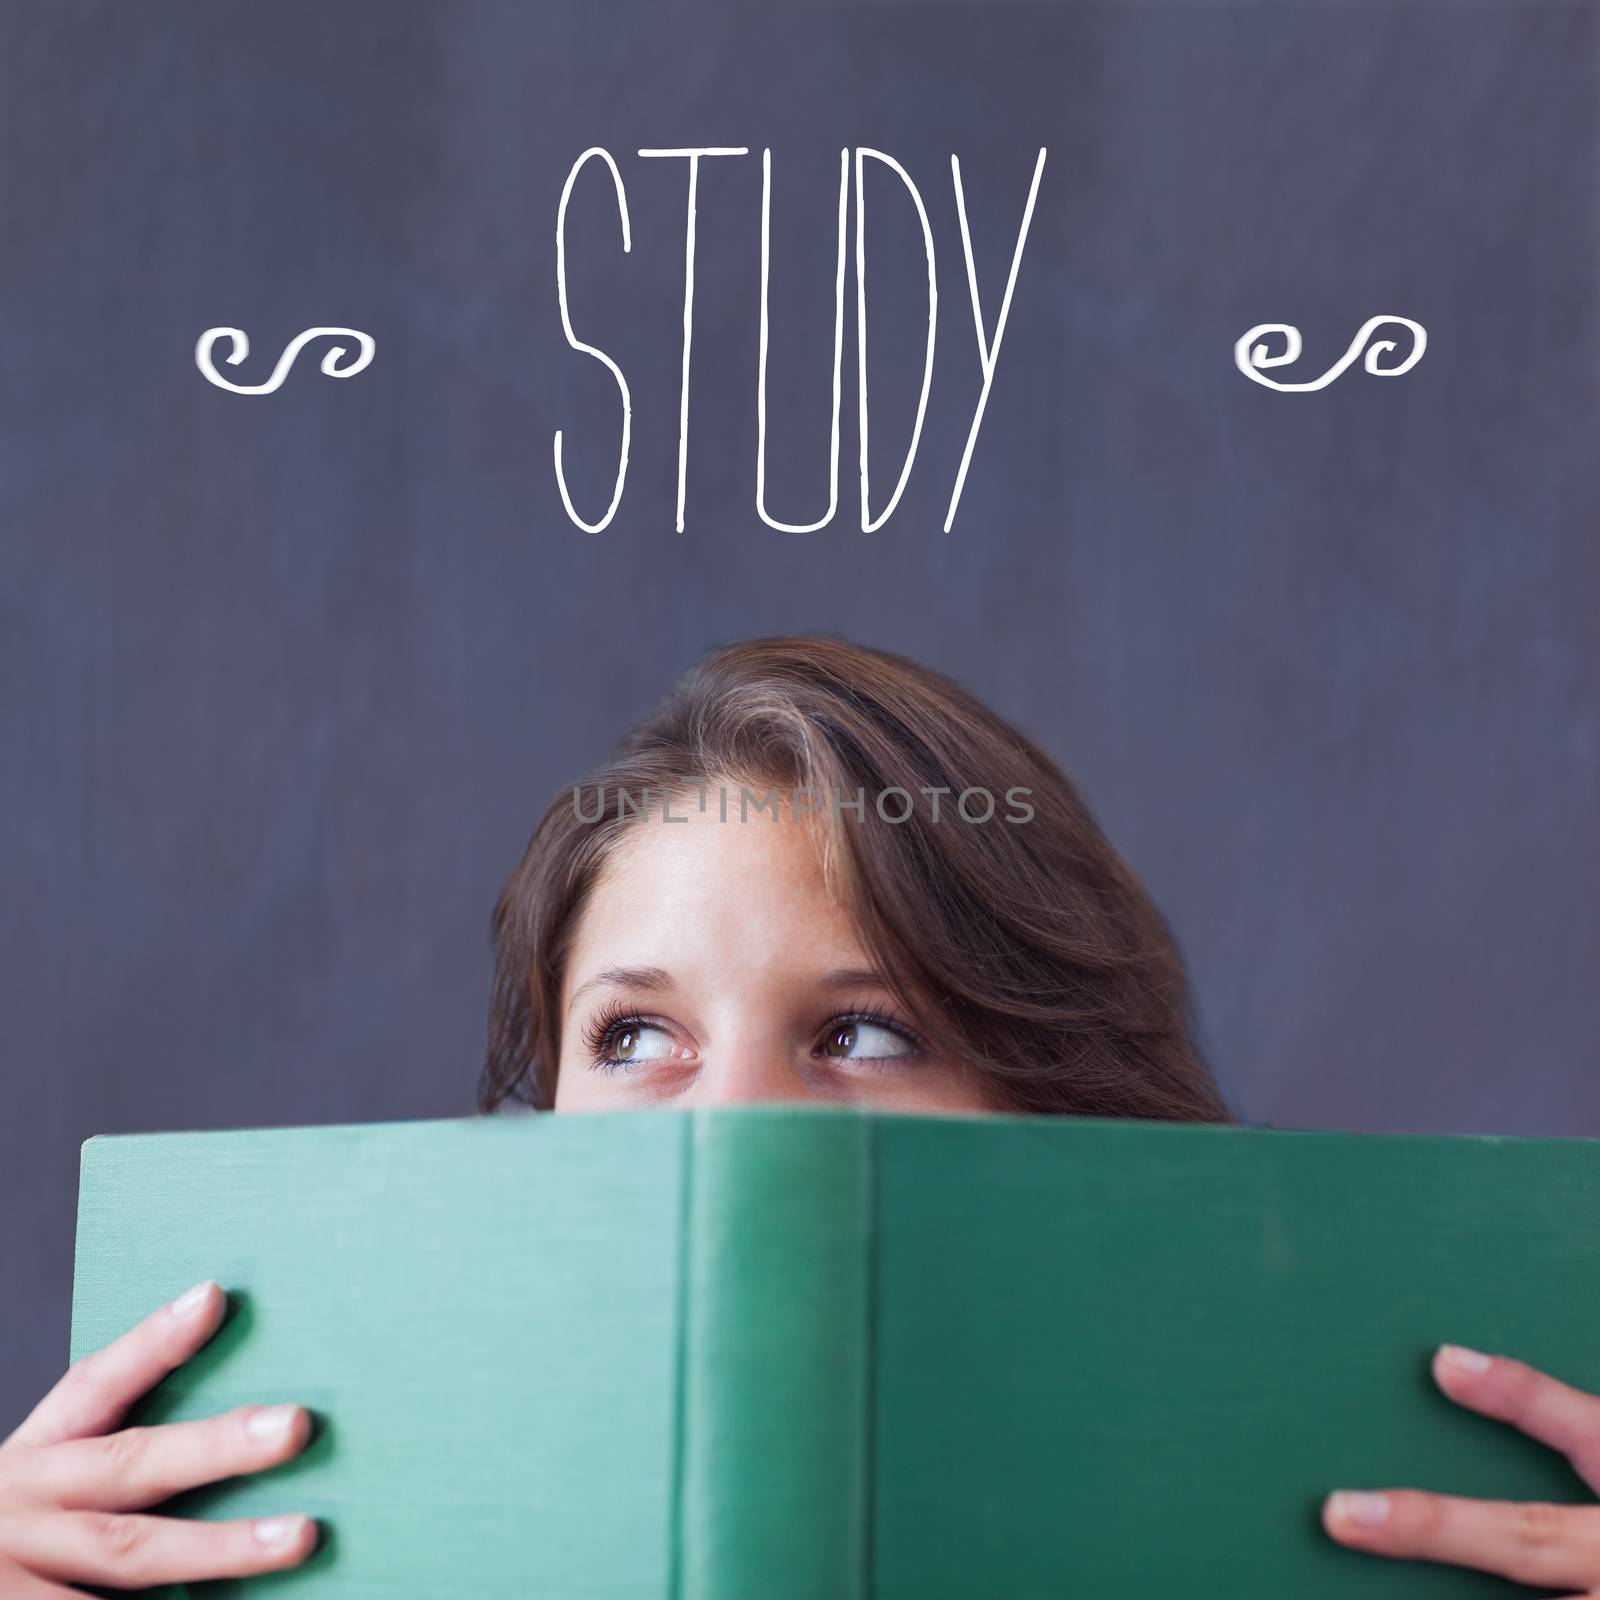 The word study against student holding book